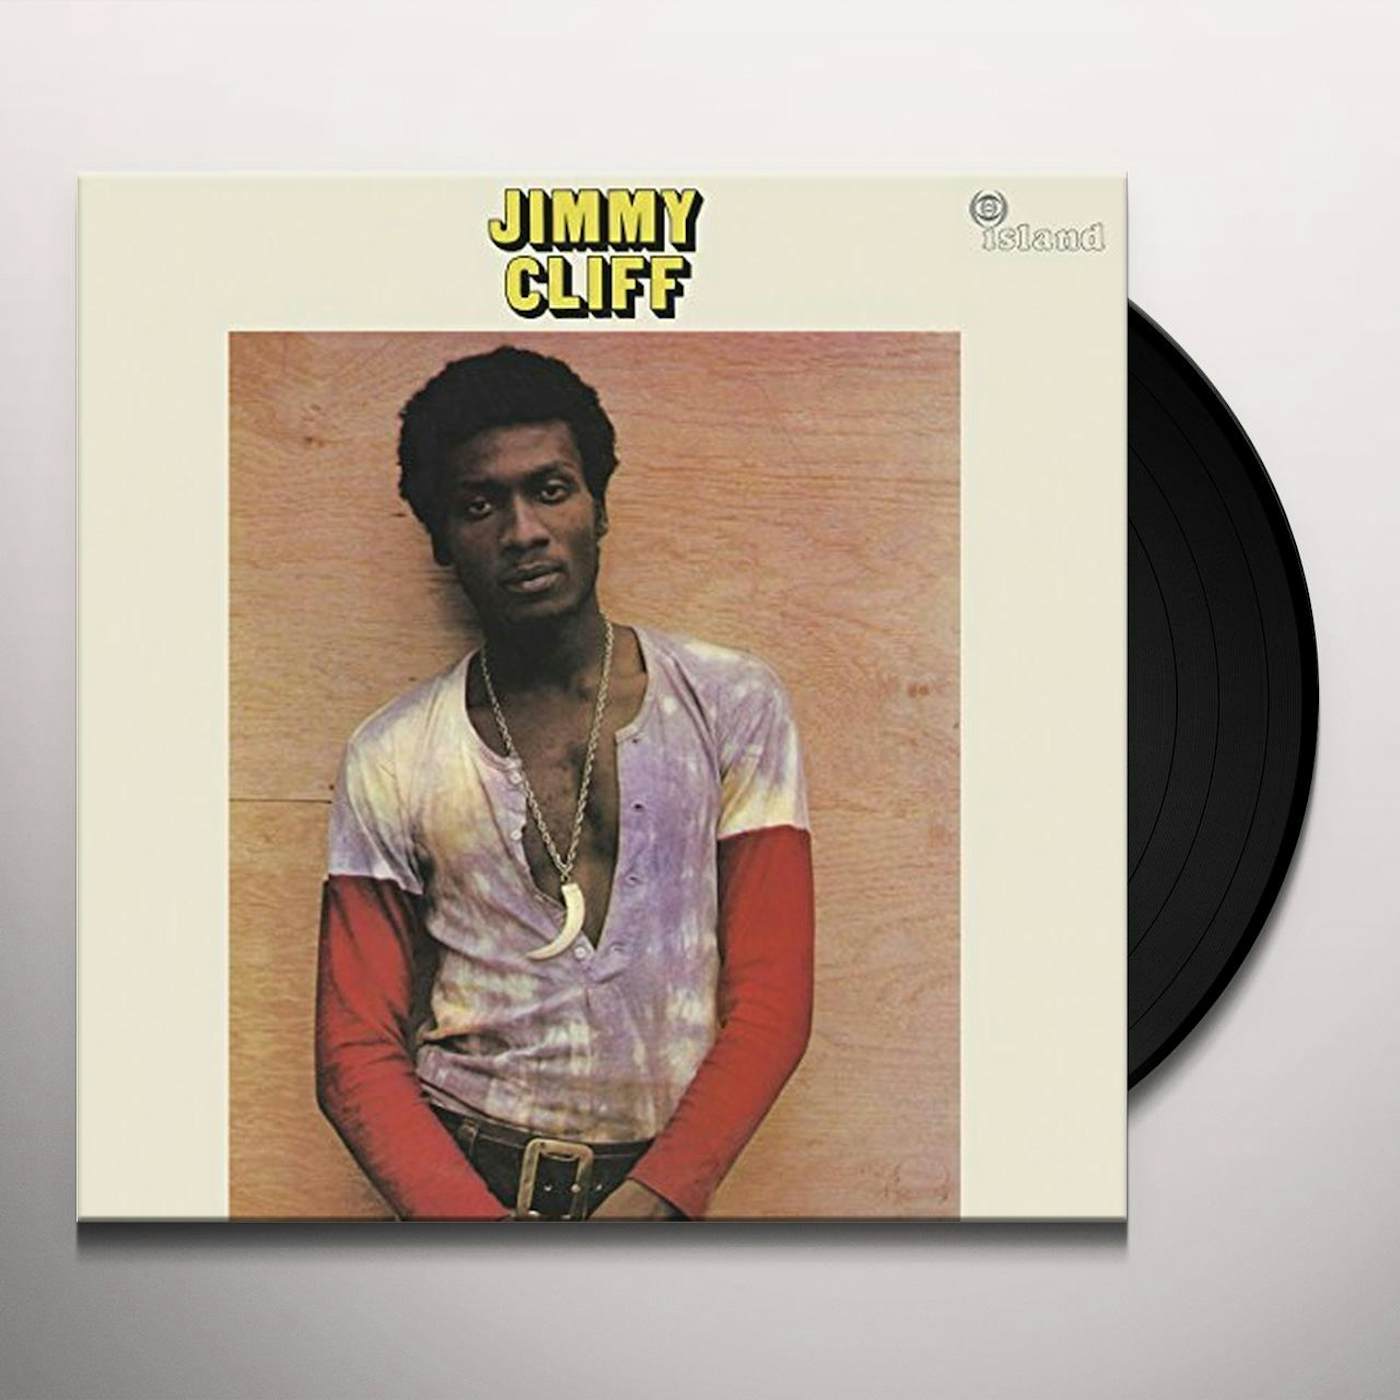 JIMMY CLIFF (EXPANDED EDITION) Vinyl Record